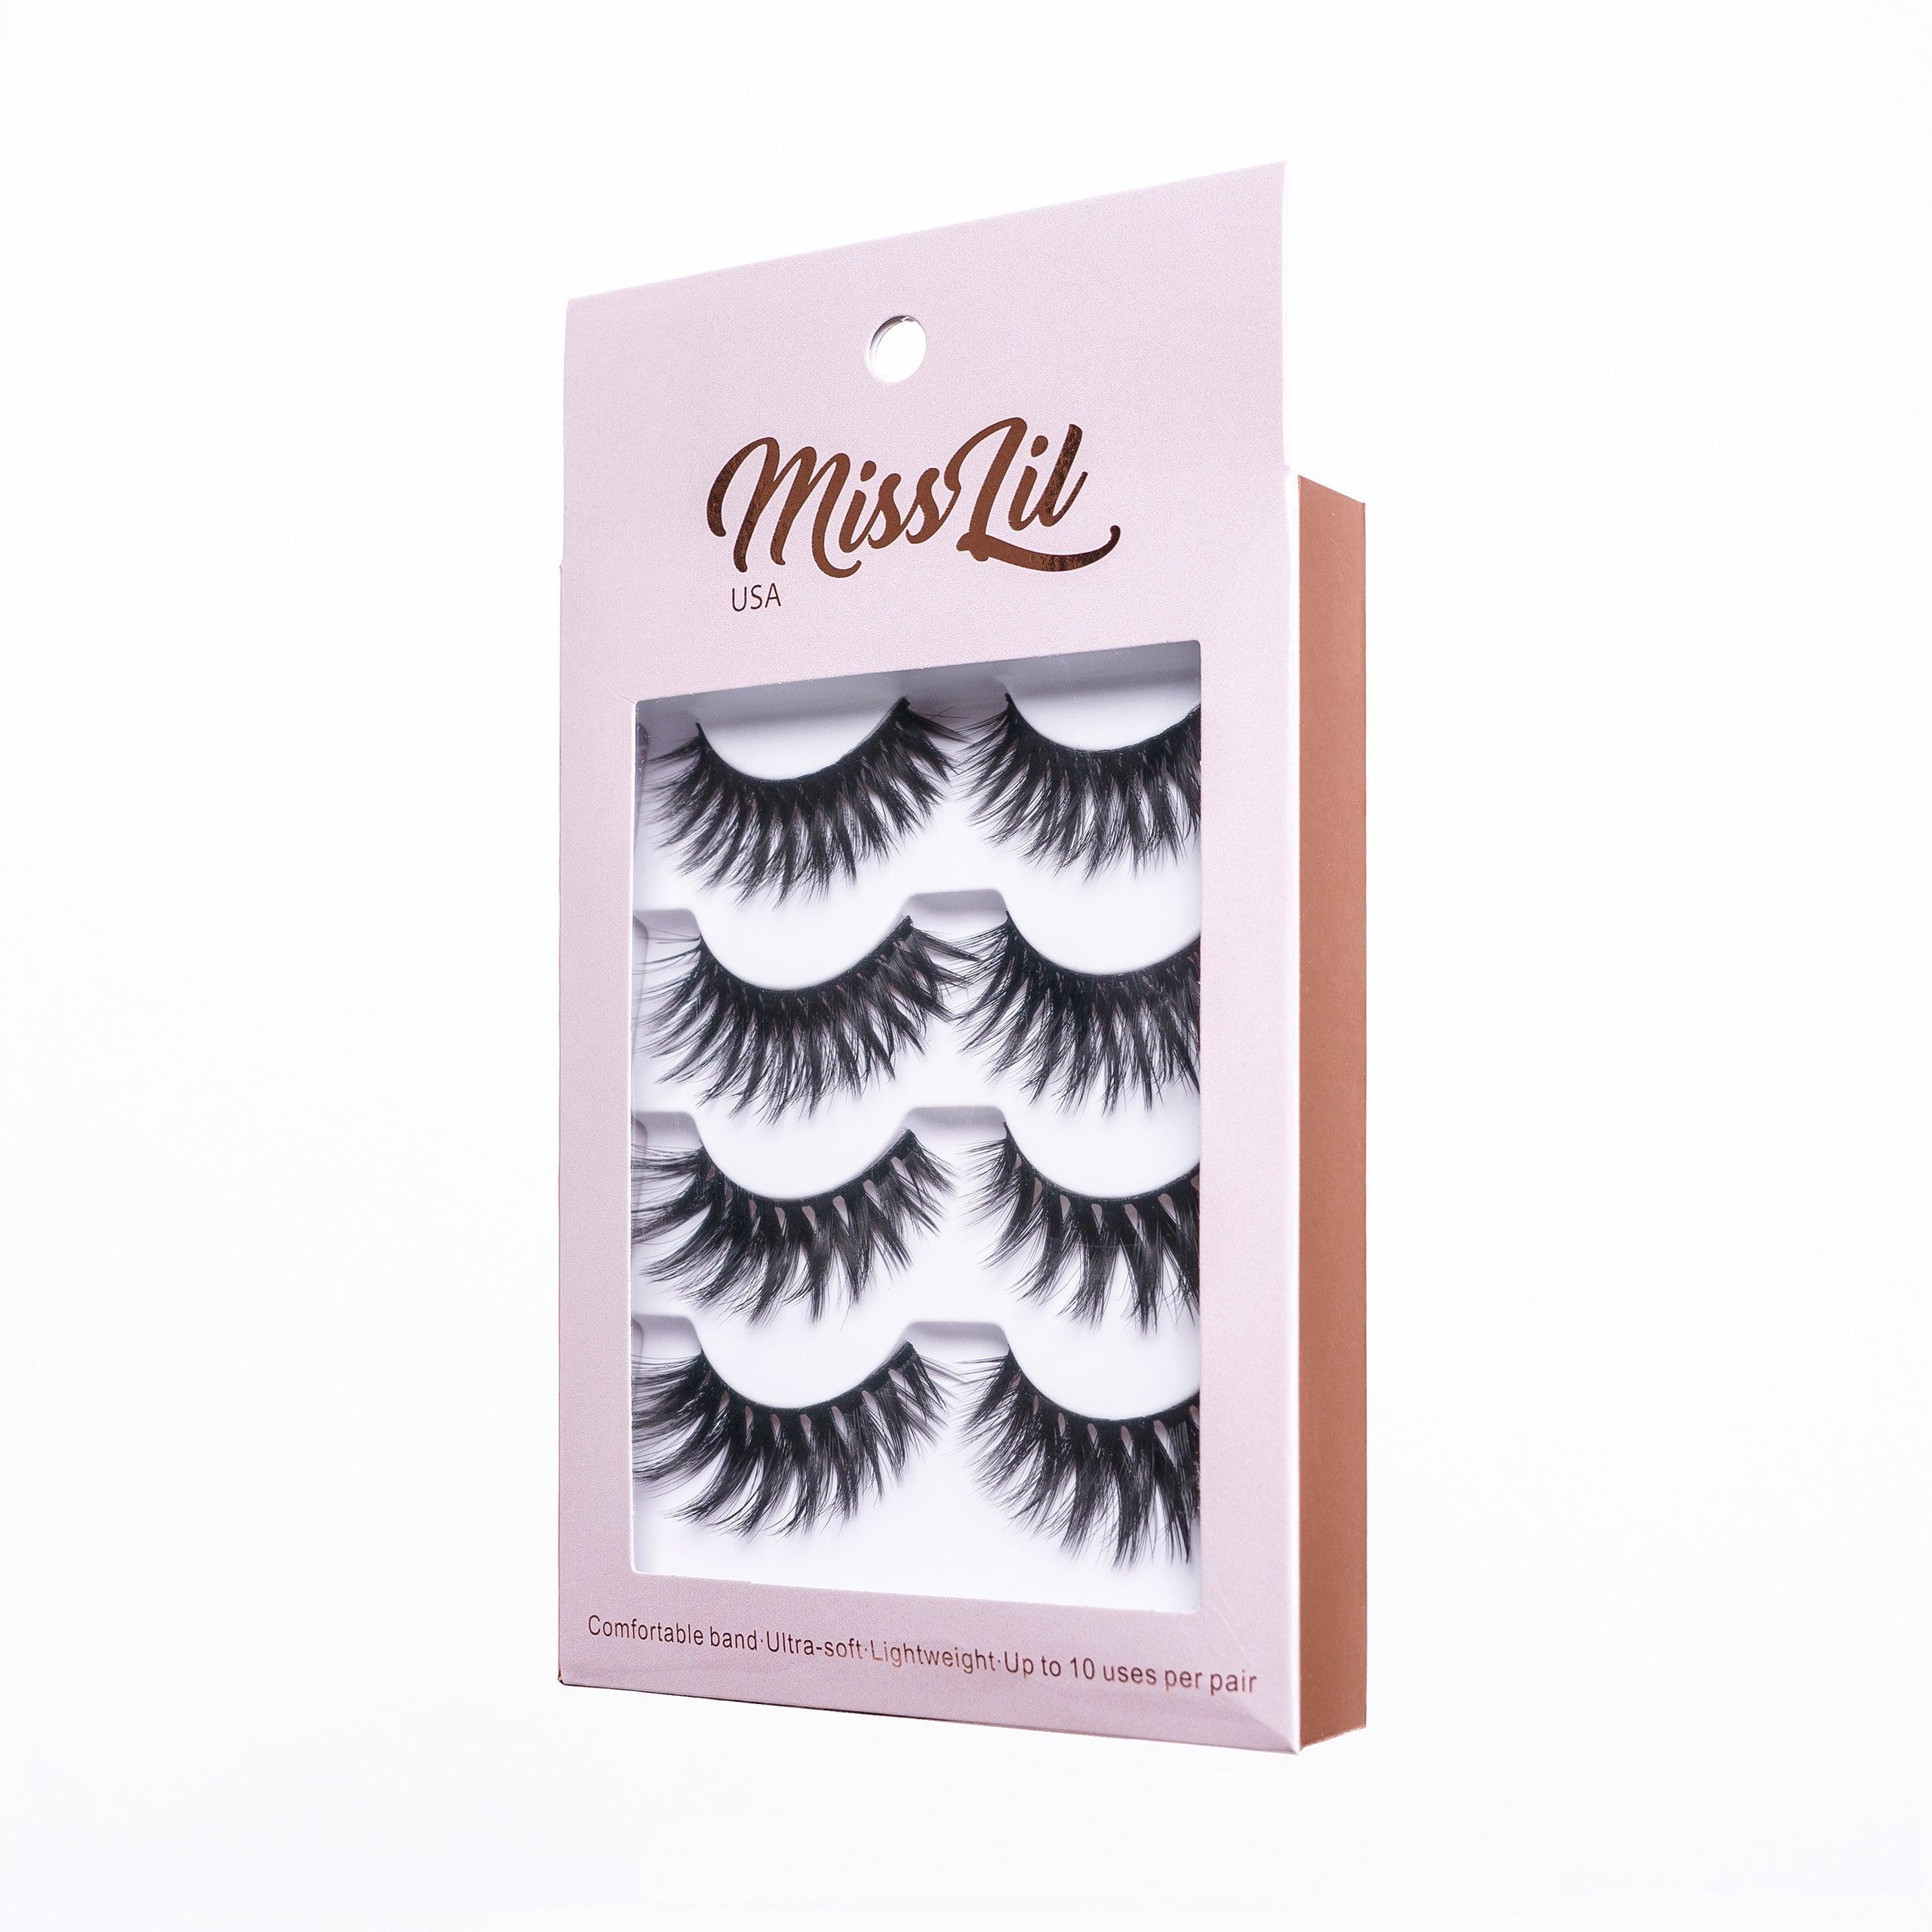 4 Pairs Lashes - Classic Collection #8 - Miss Lil USA